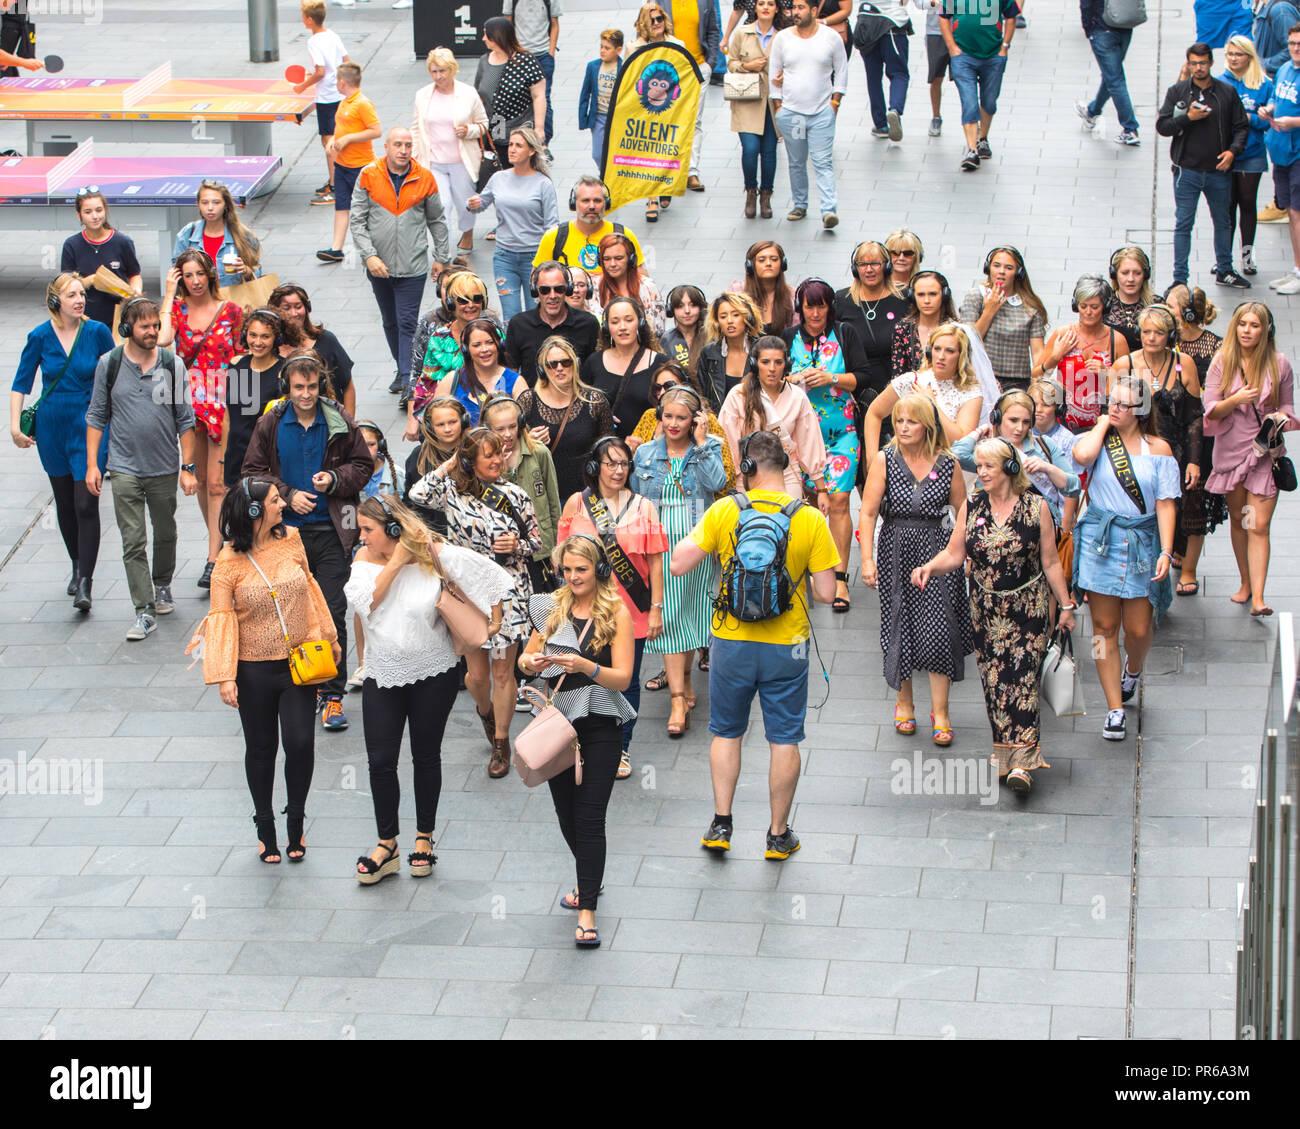 Silent Disco tour inLiverpool.  A group of tourists taking part in a Silent Advenutres Silend Disco Tour. Stock Photo